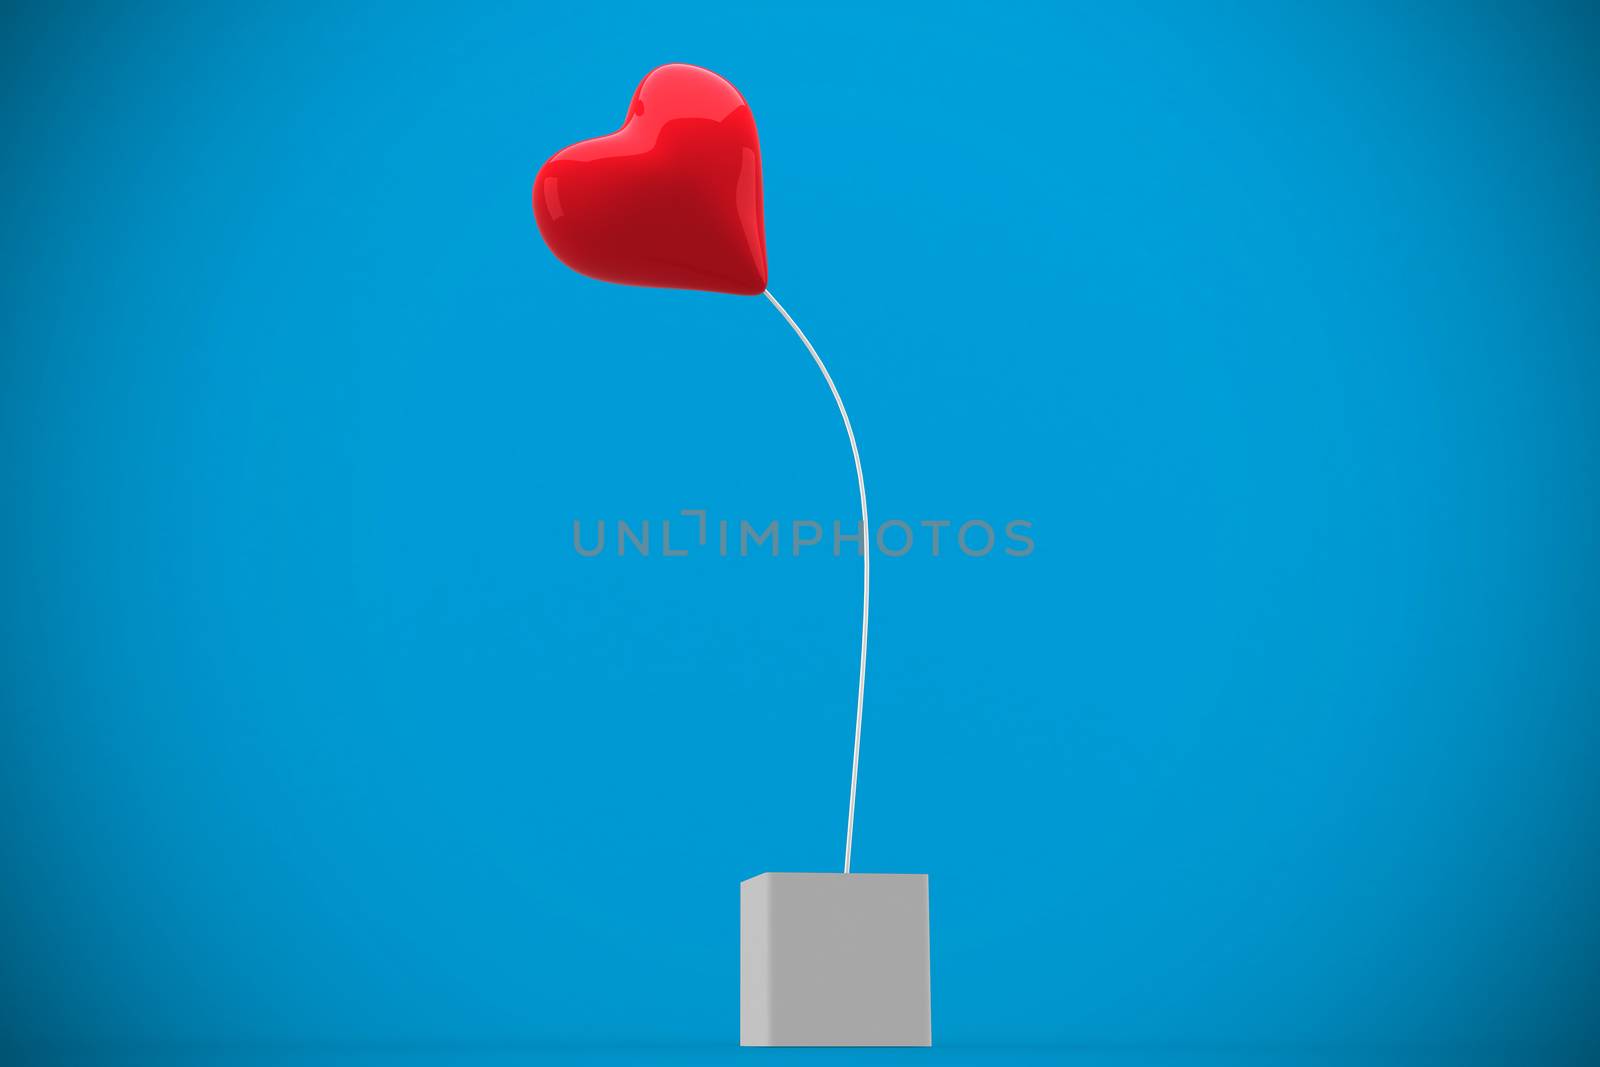 Red heart against blue background with vignette